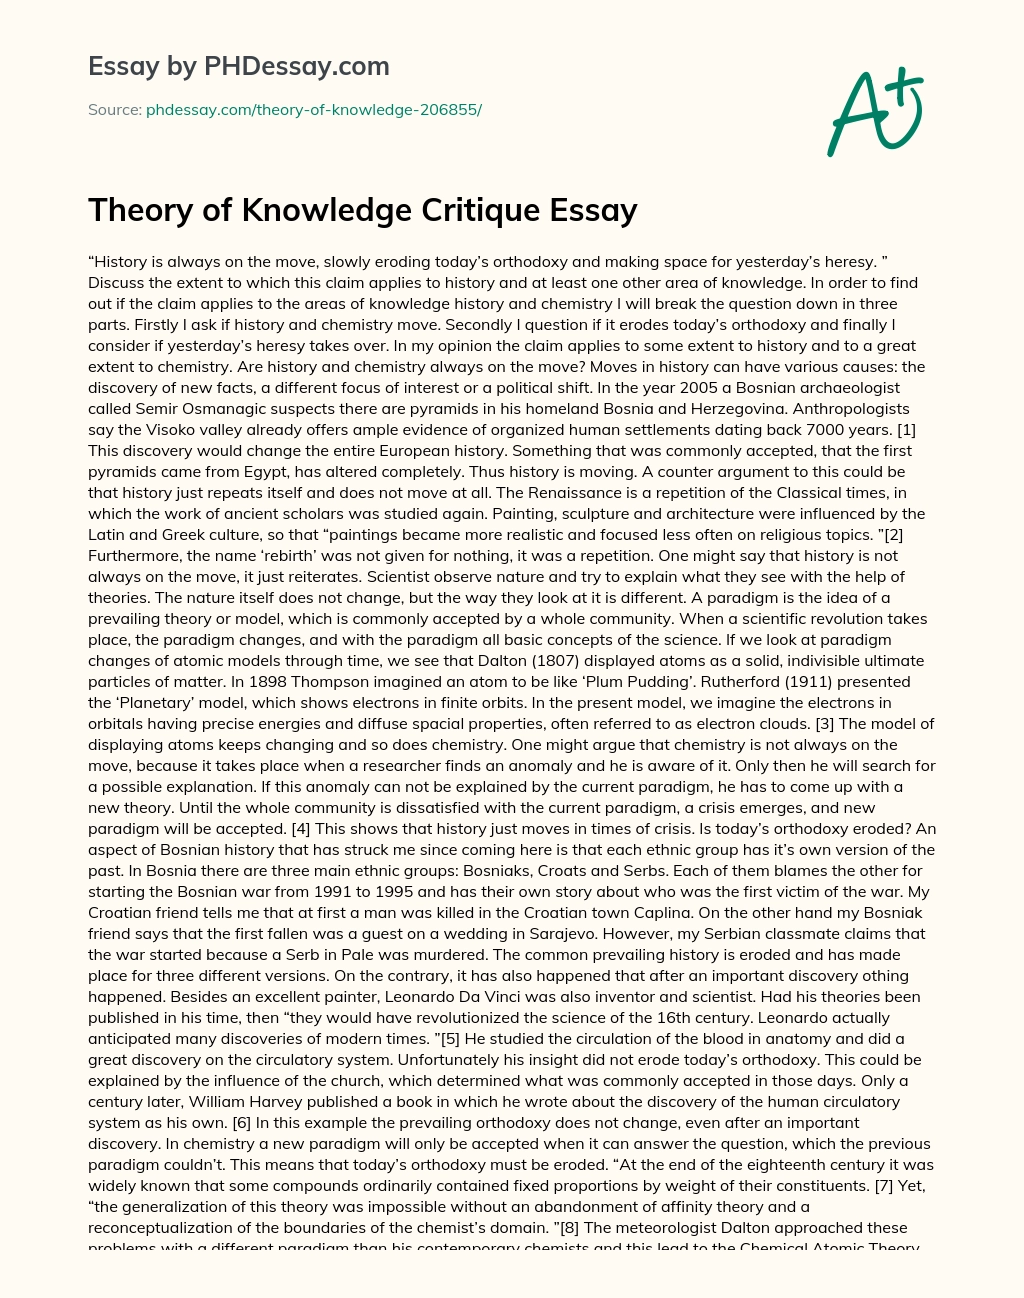 Theory of Knowledge Critique Essay essay